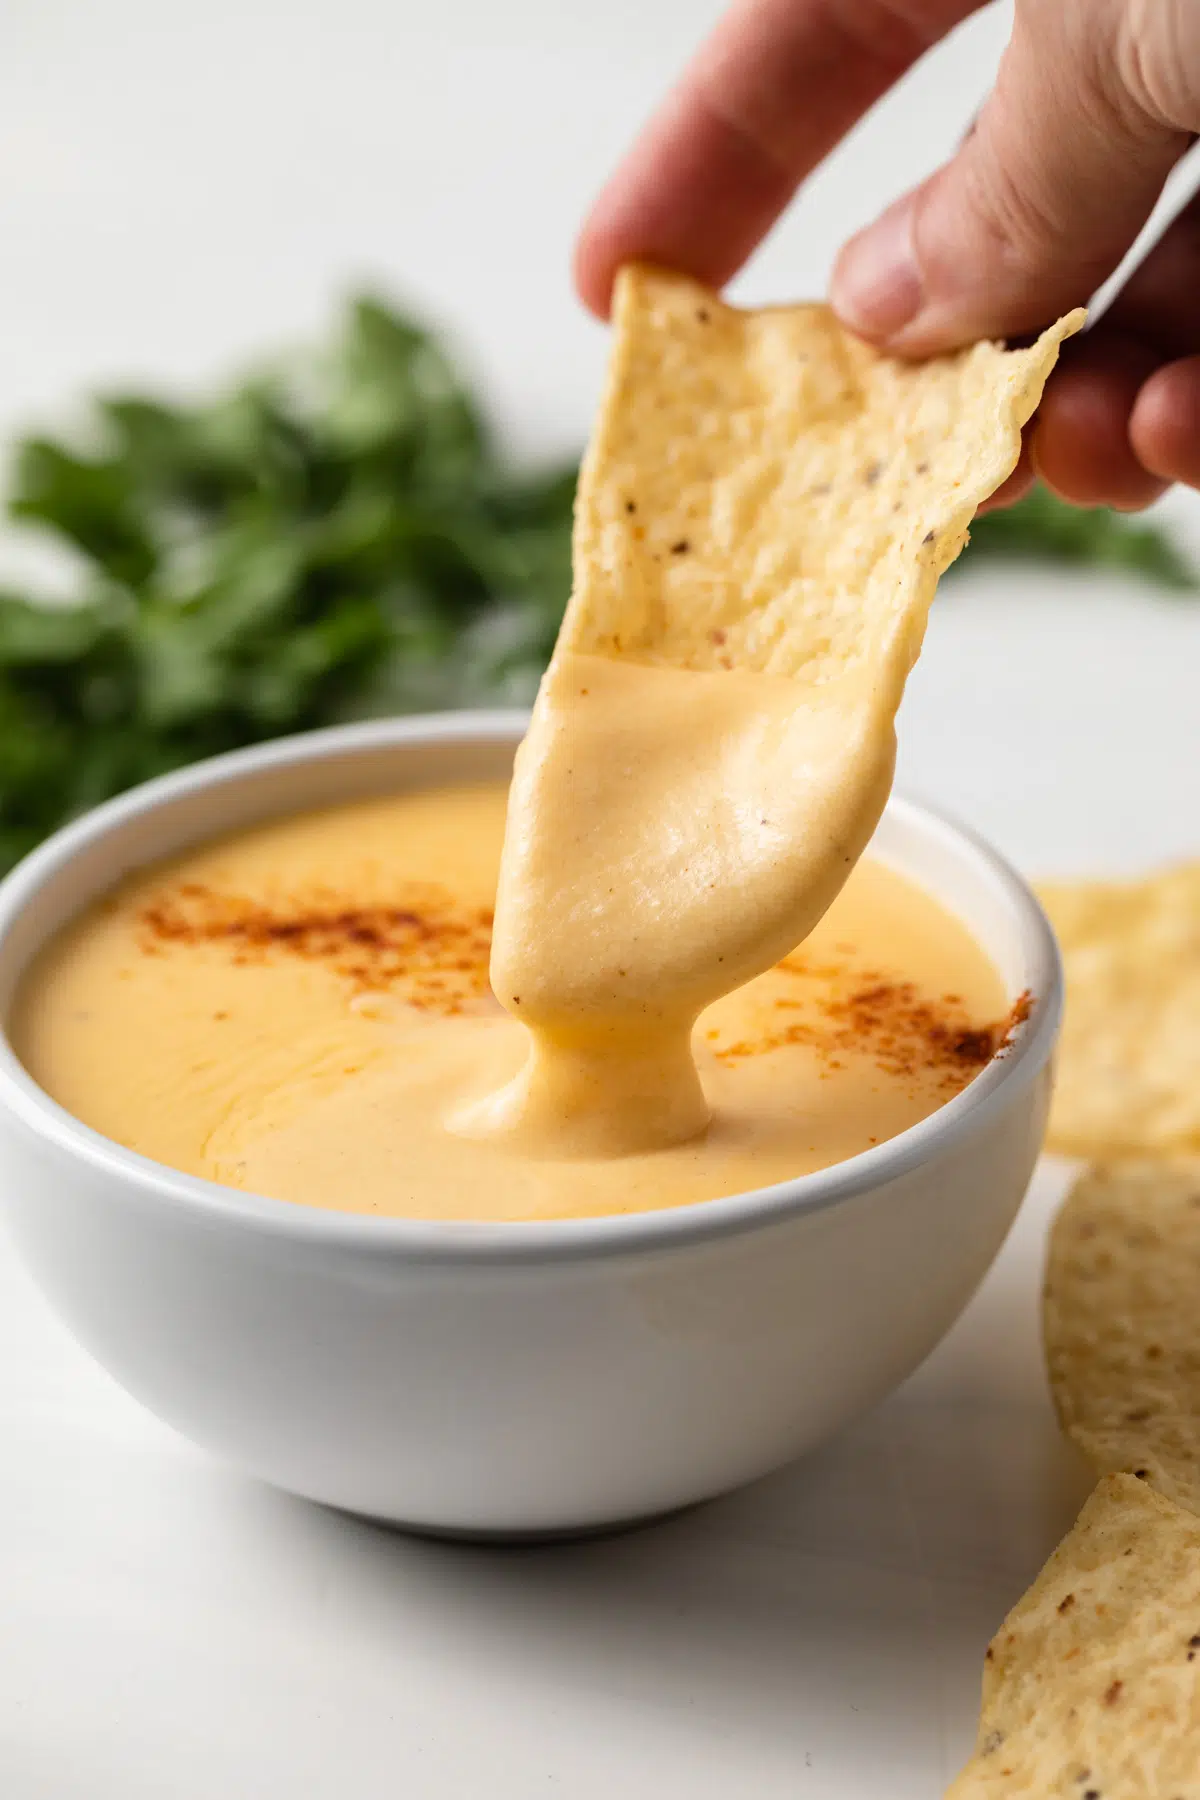 A chip scooping up cheese sauce from a white bowl.